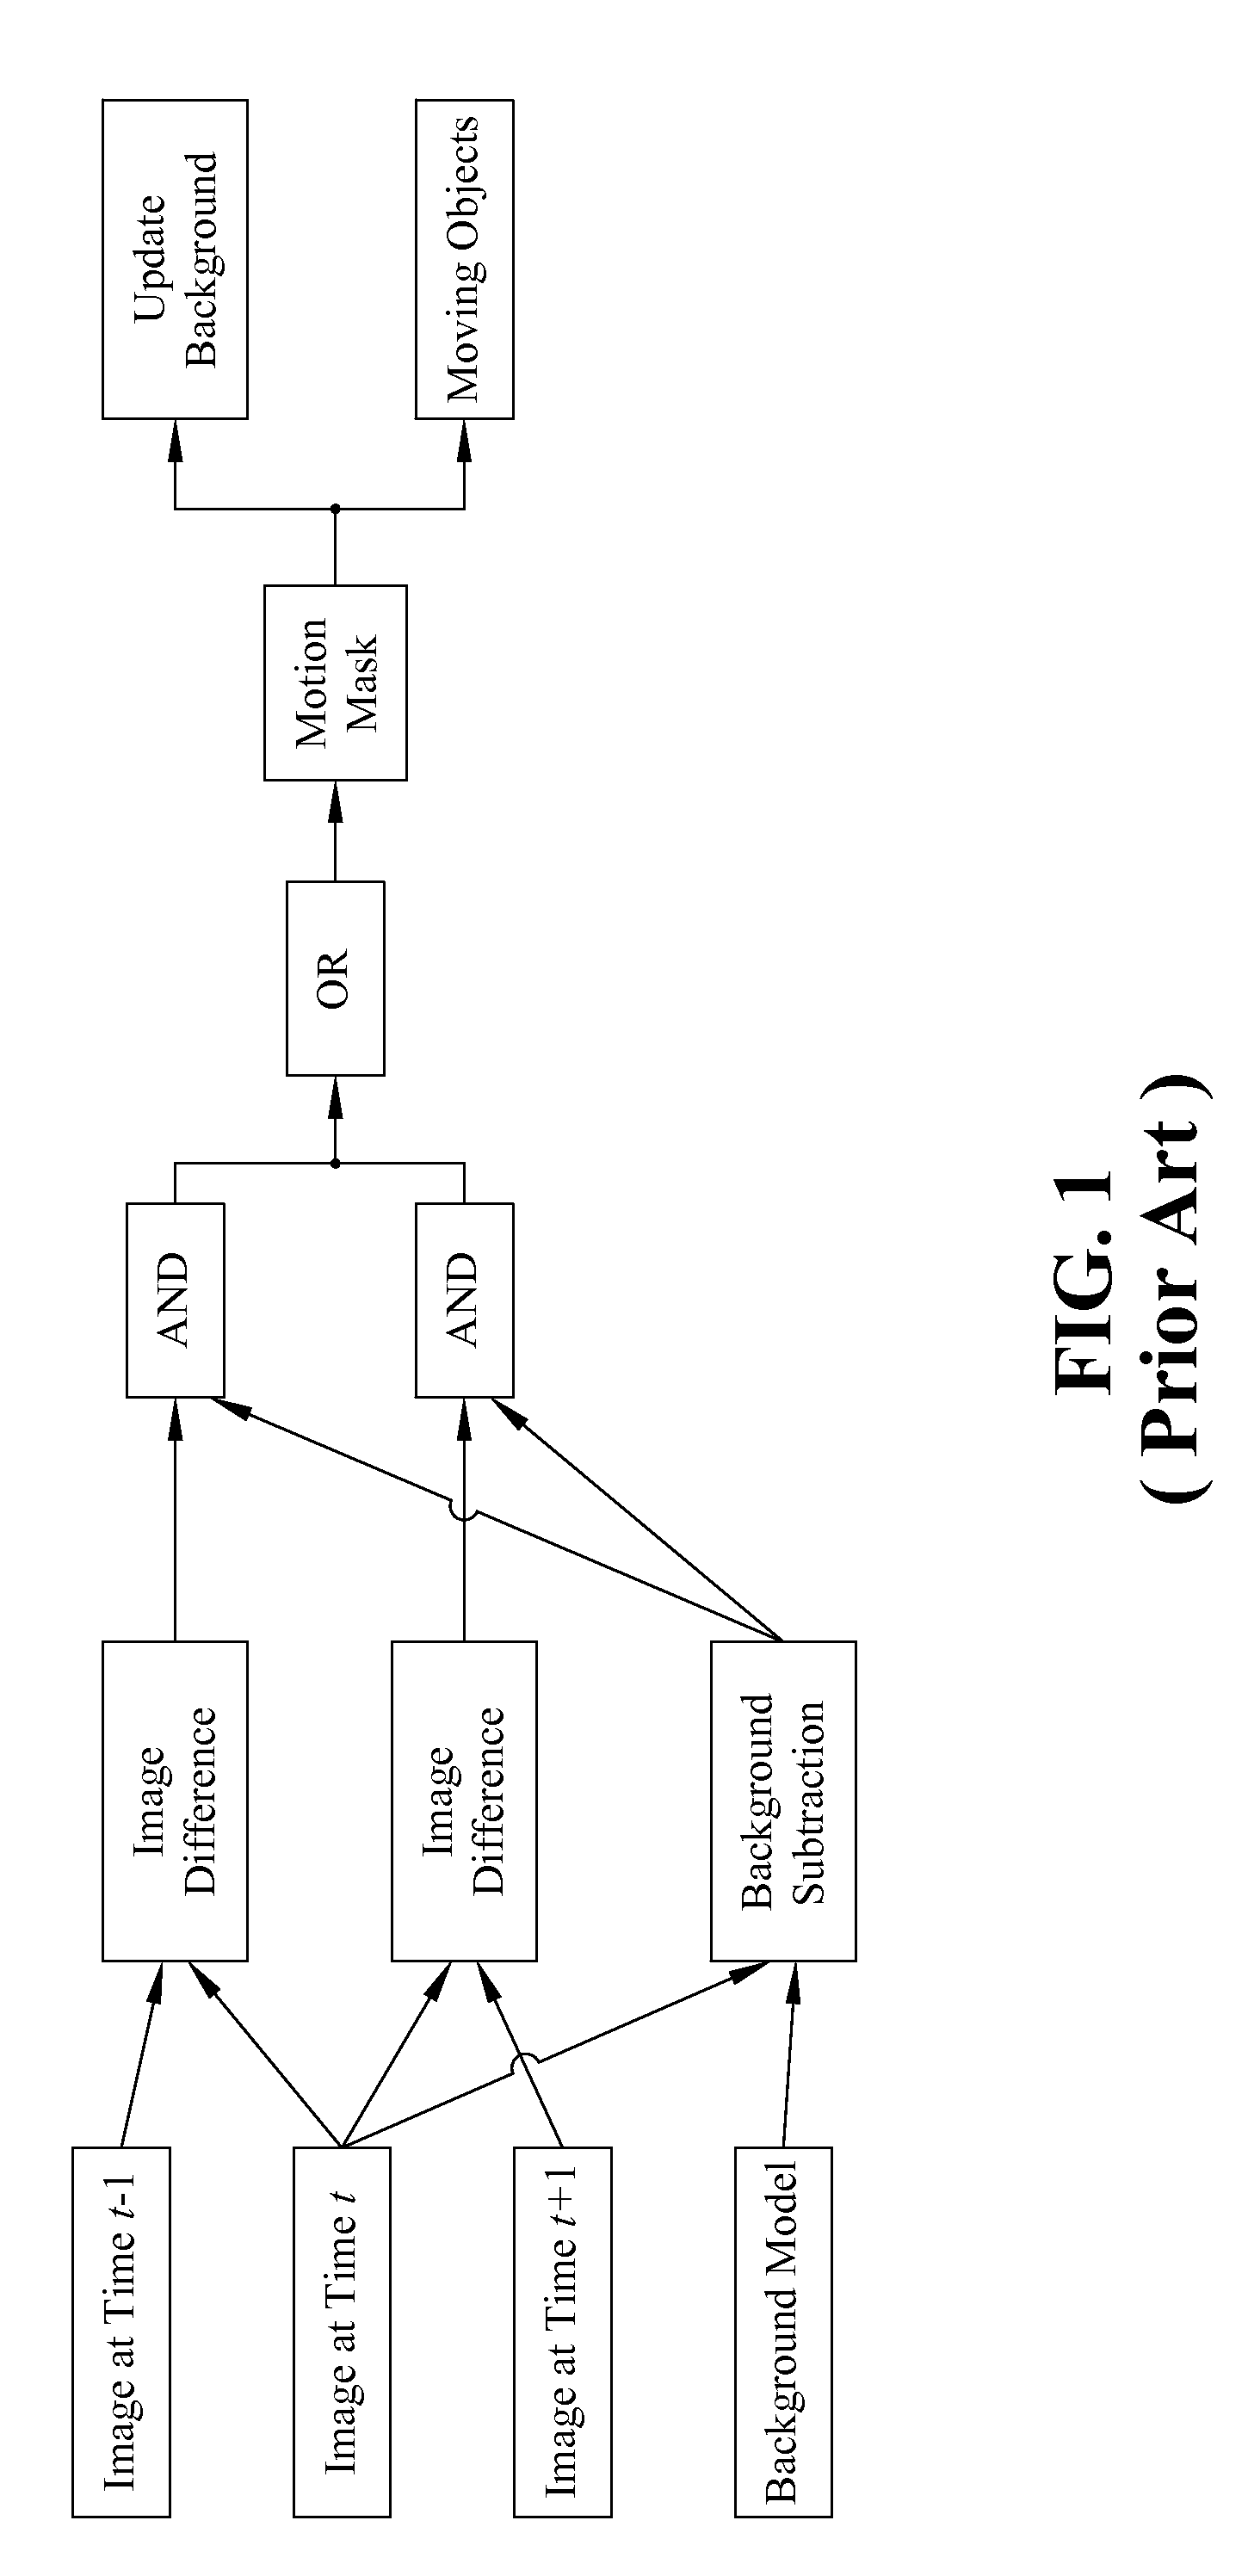 Moving object detection apparatus and method